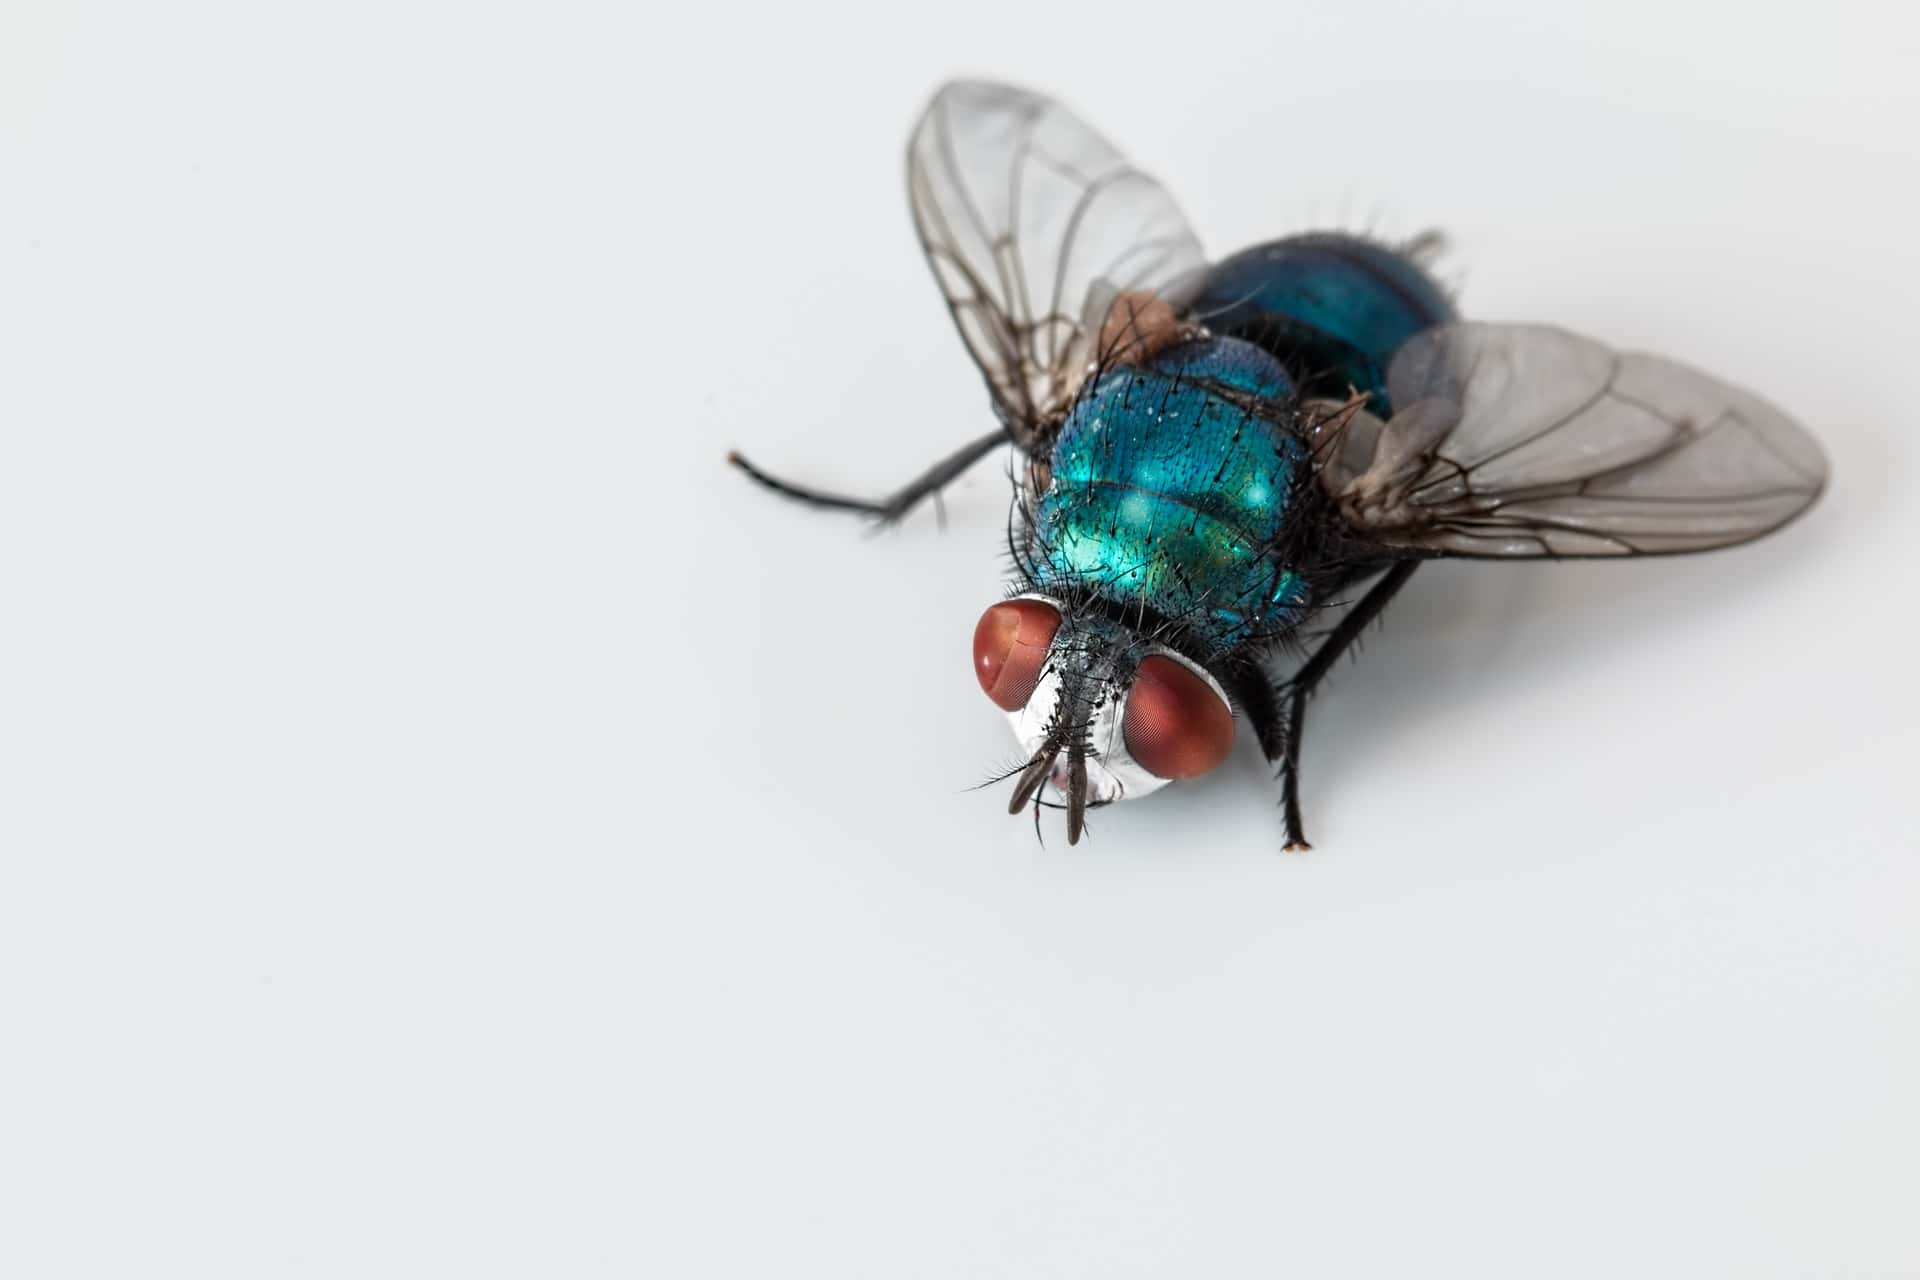 How to Get Rid of Flies - An Easy DIY Fly Control Programme